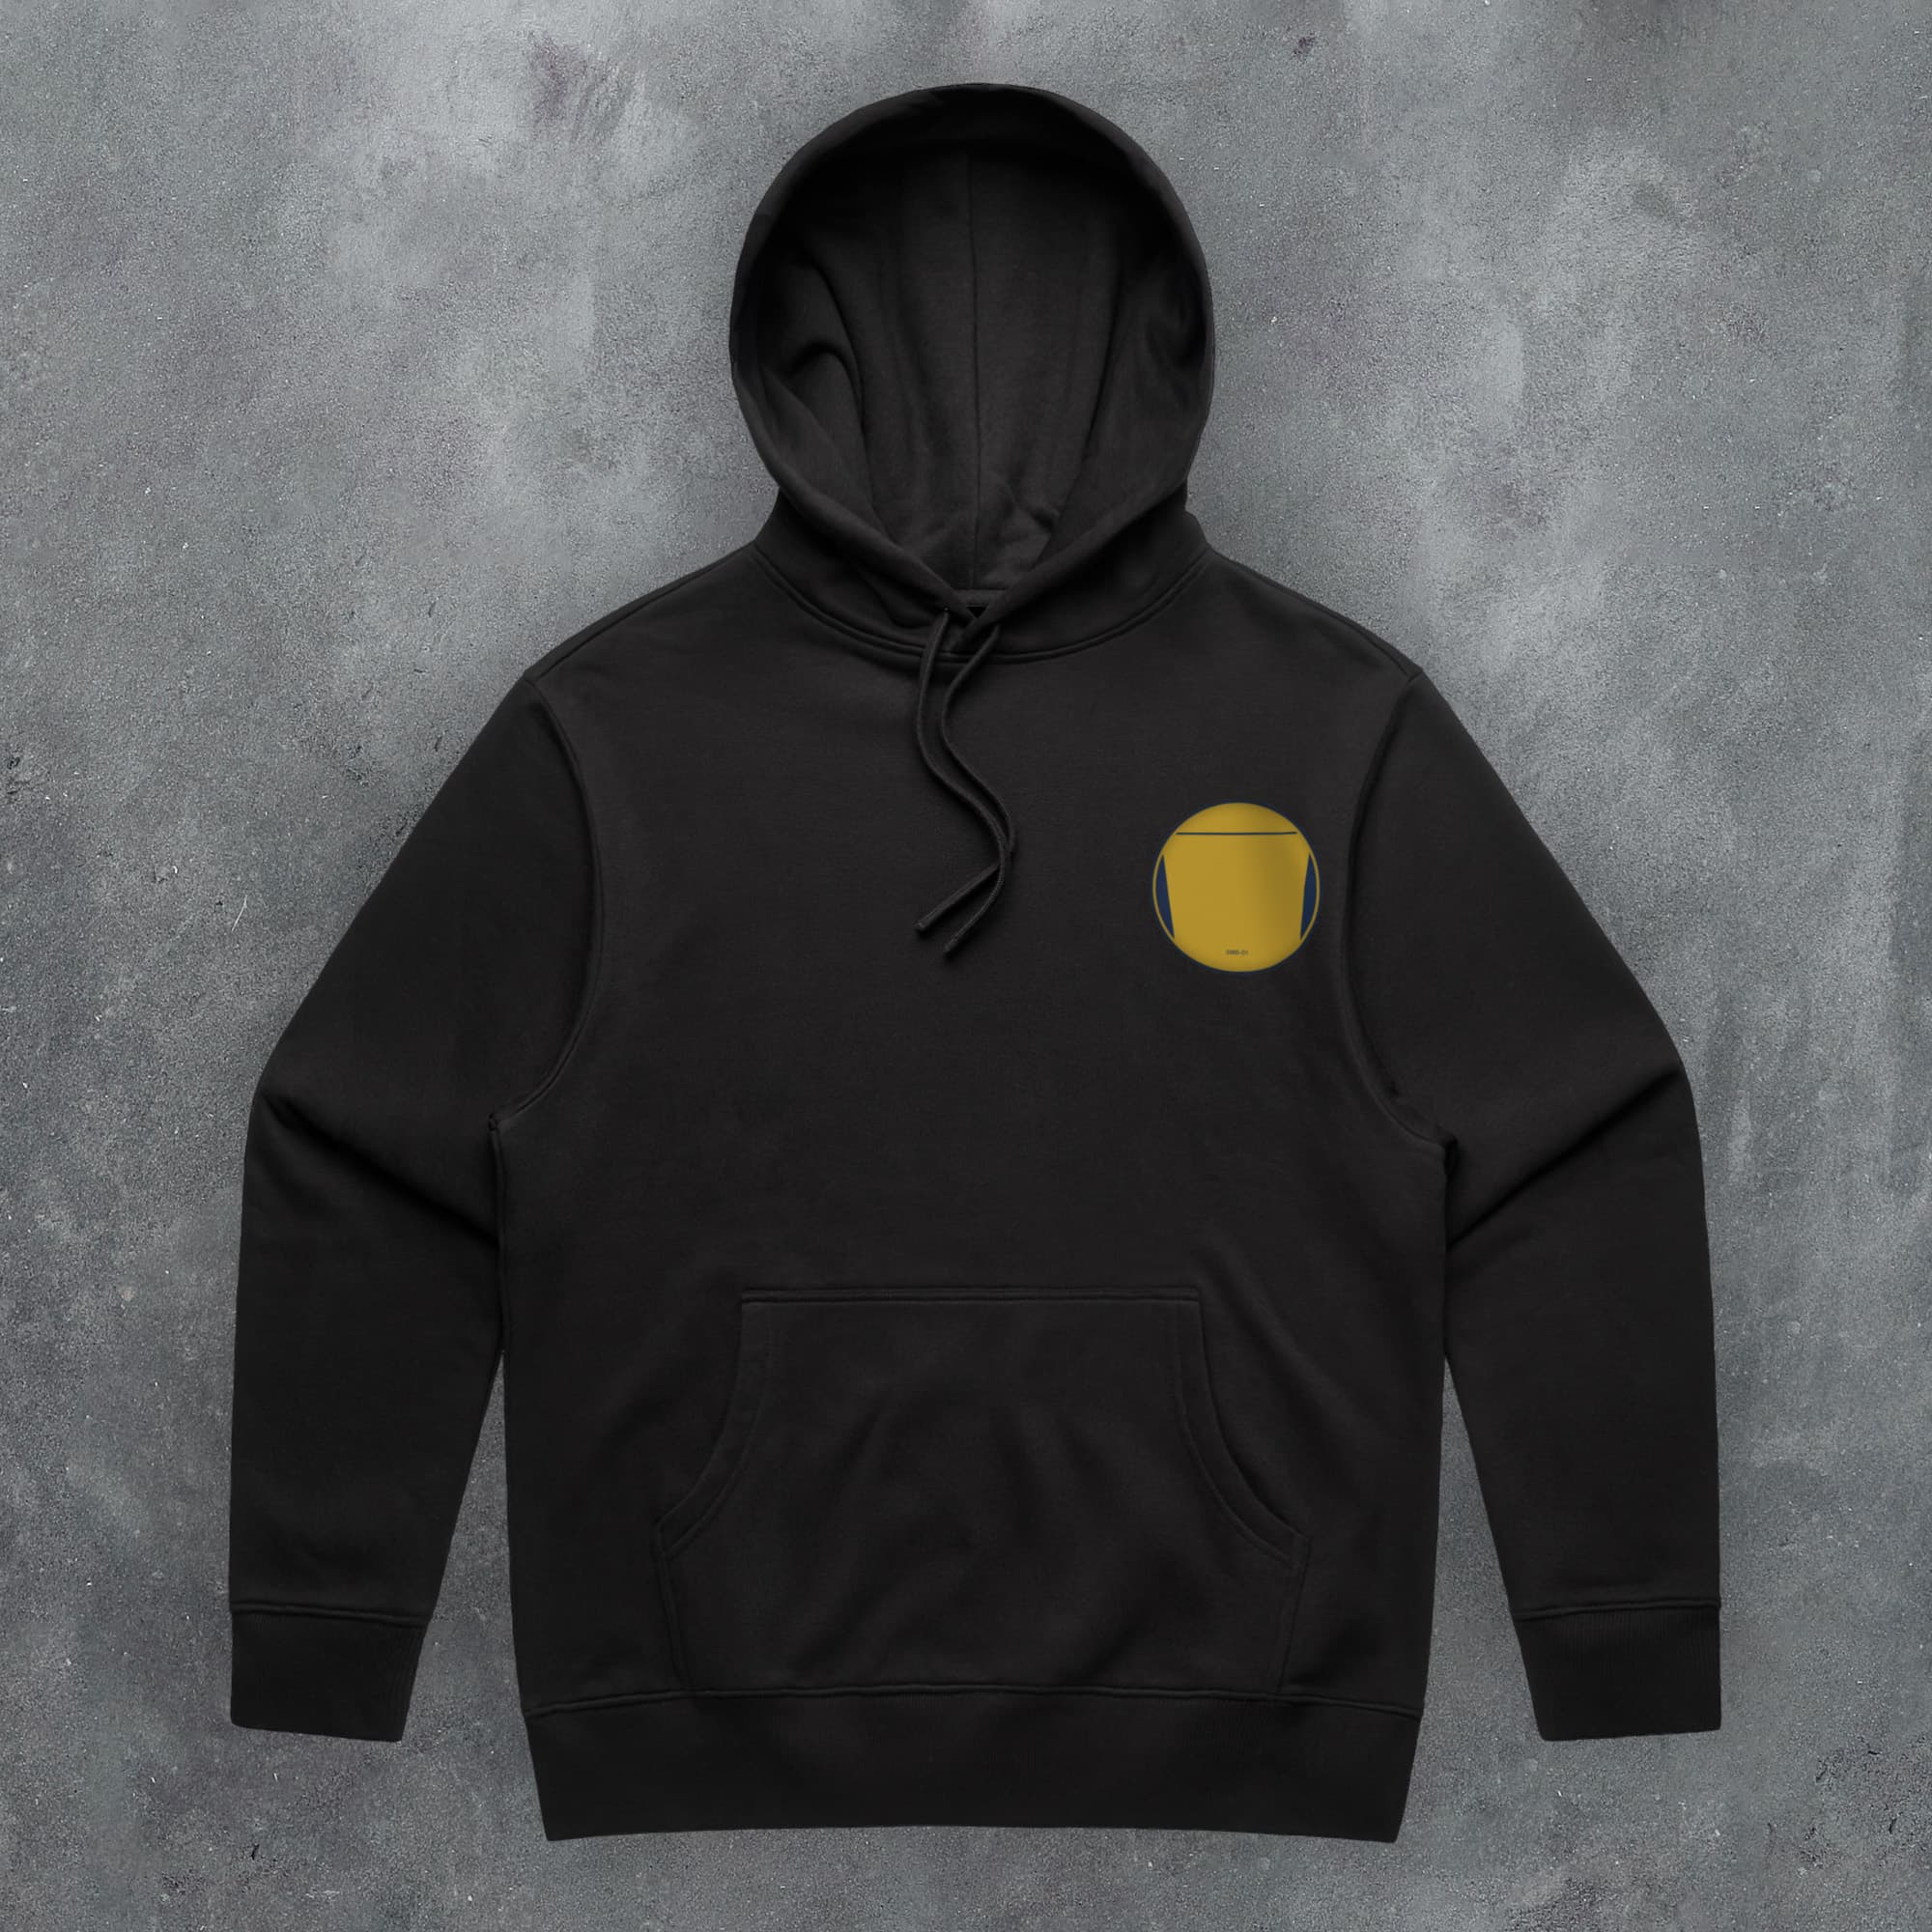 a black hoodie with a yellow patch on it